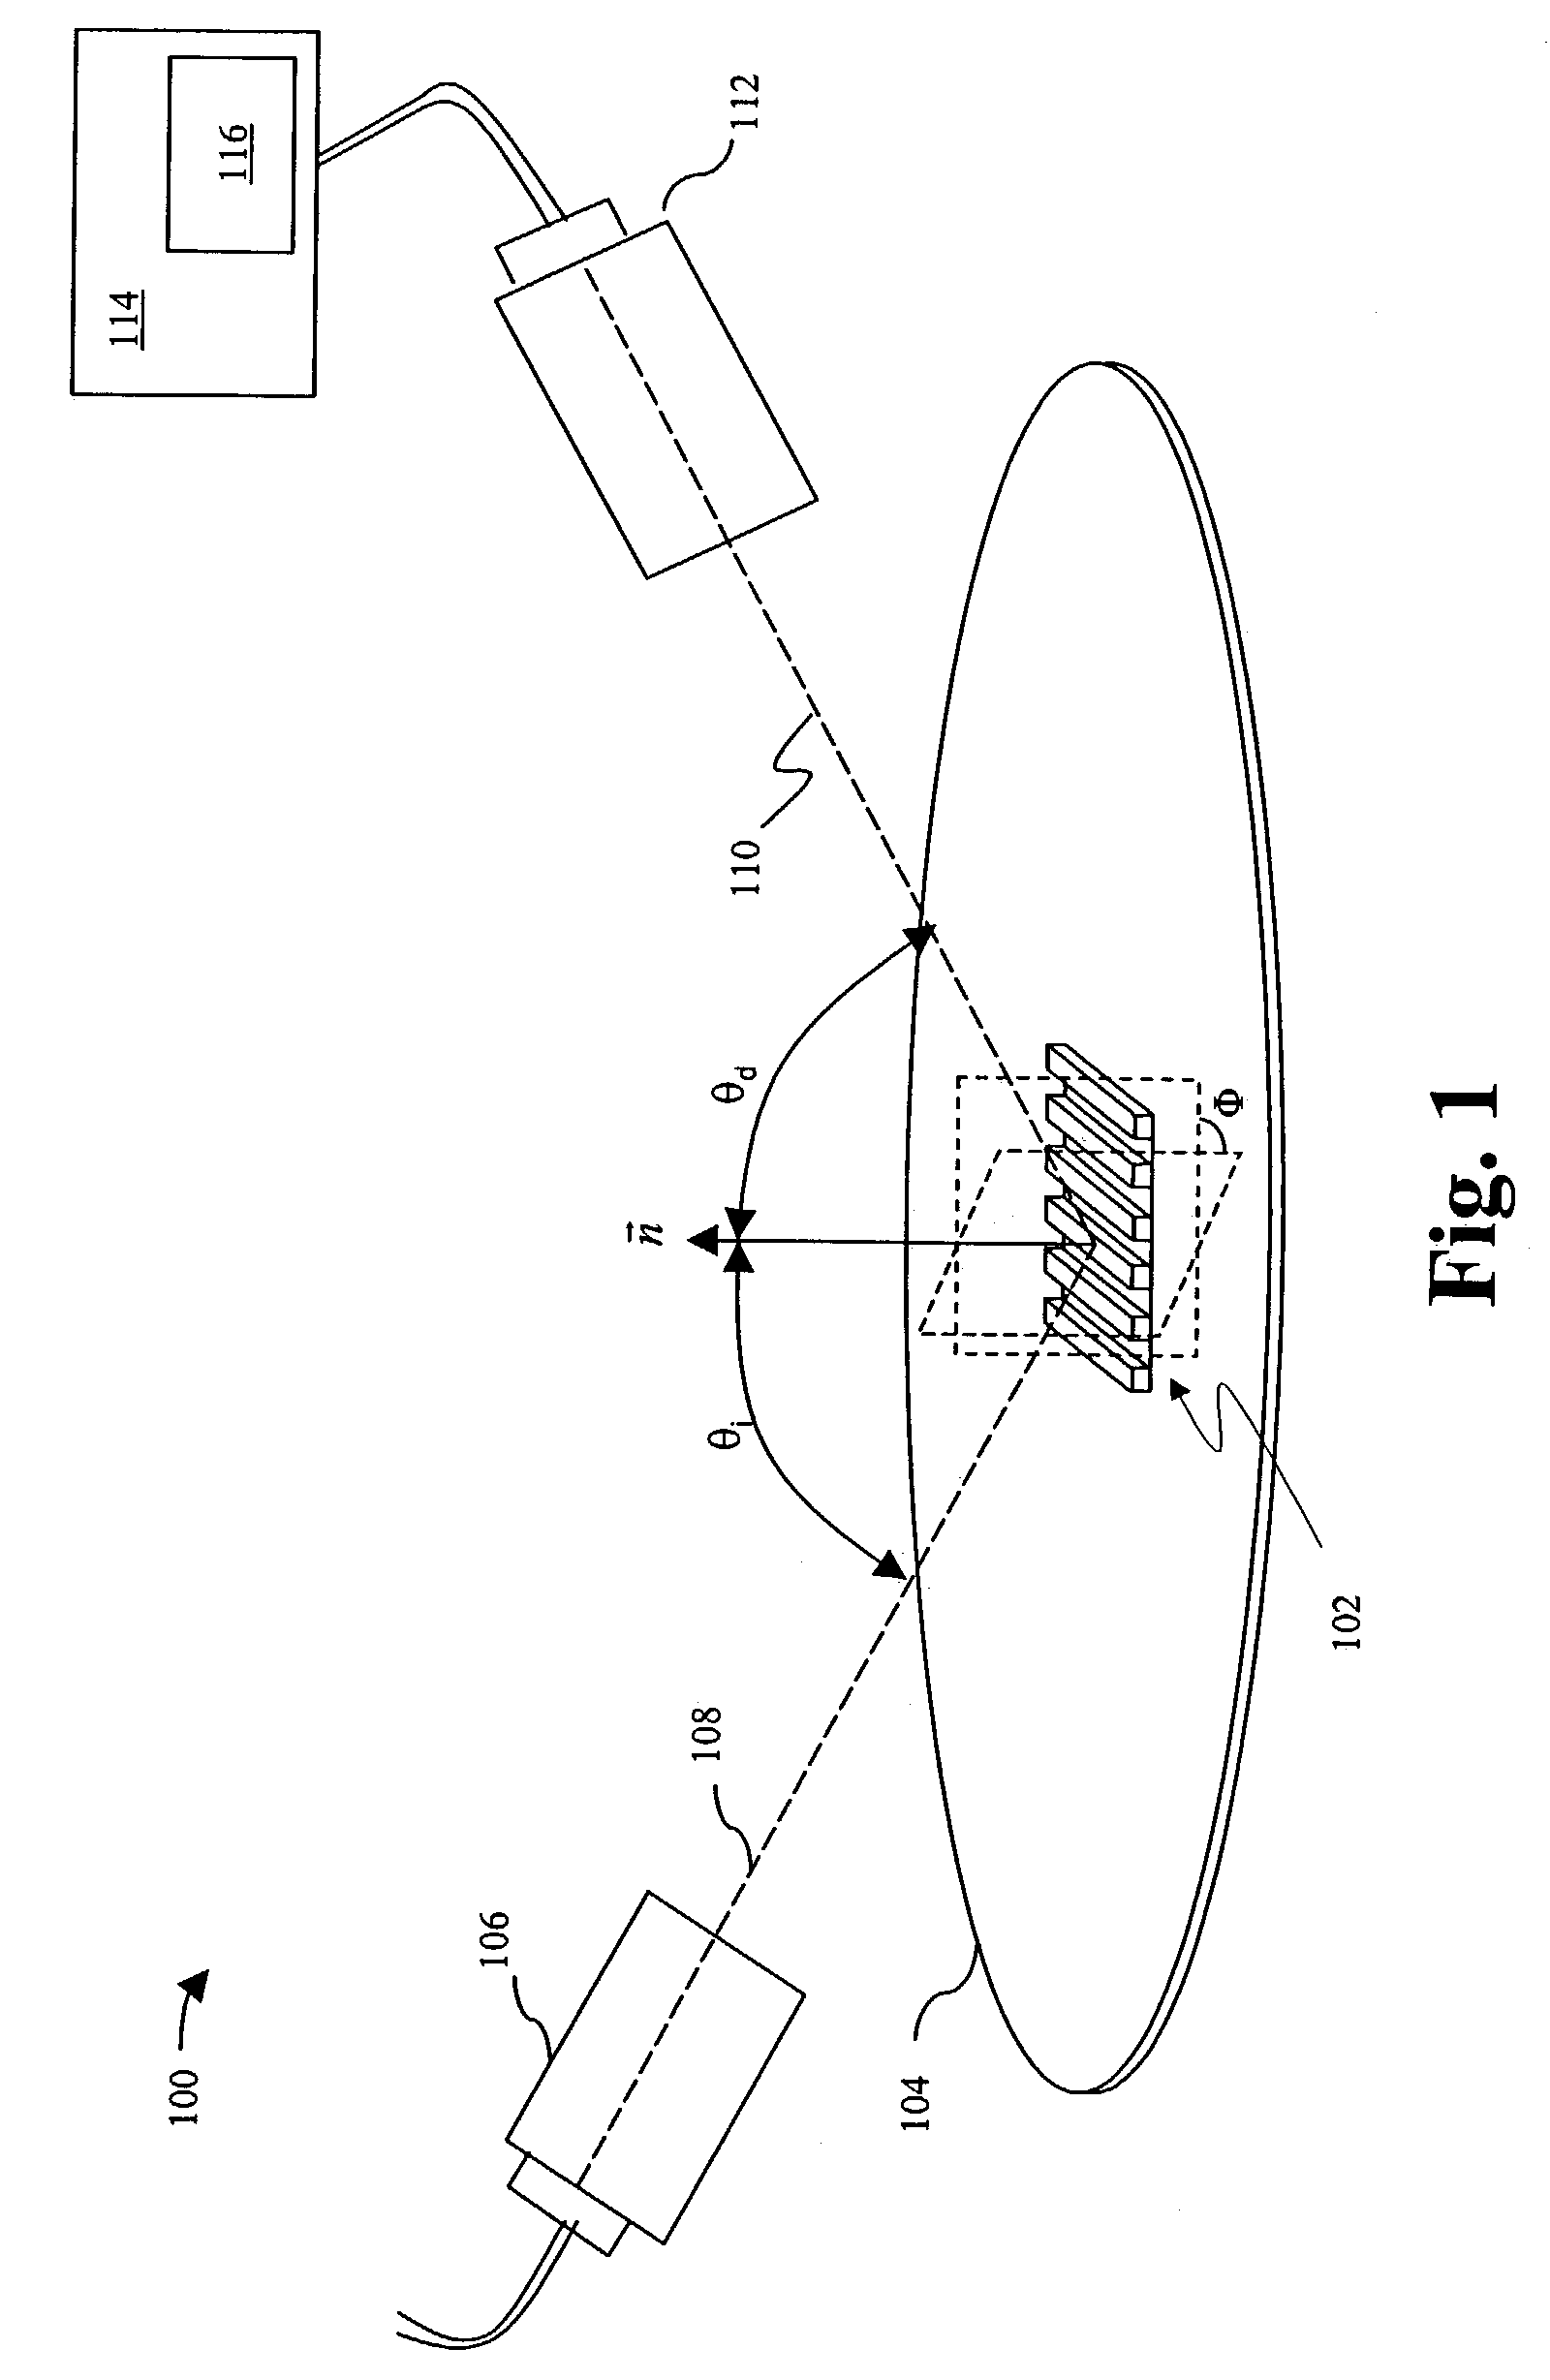 Generic interface for an optical metrology system